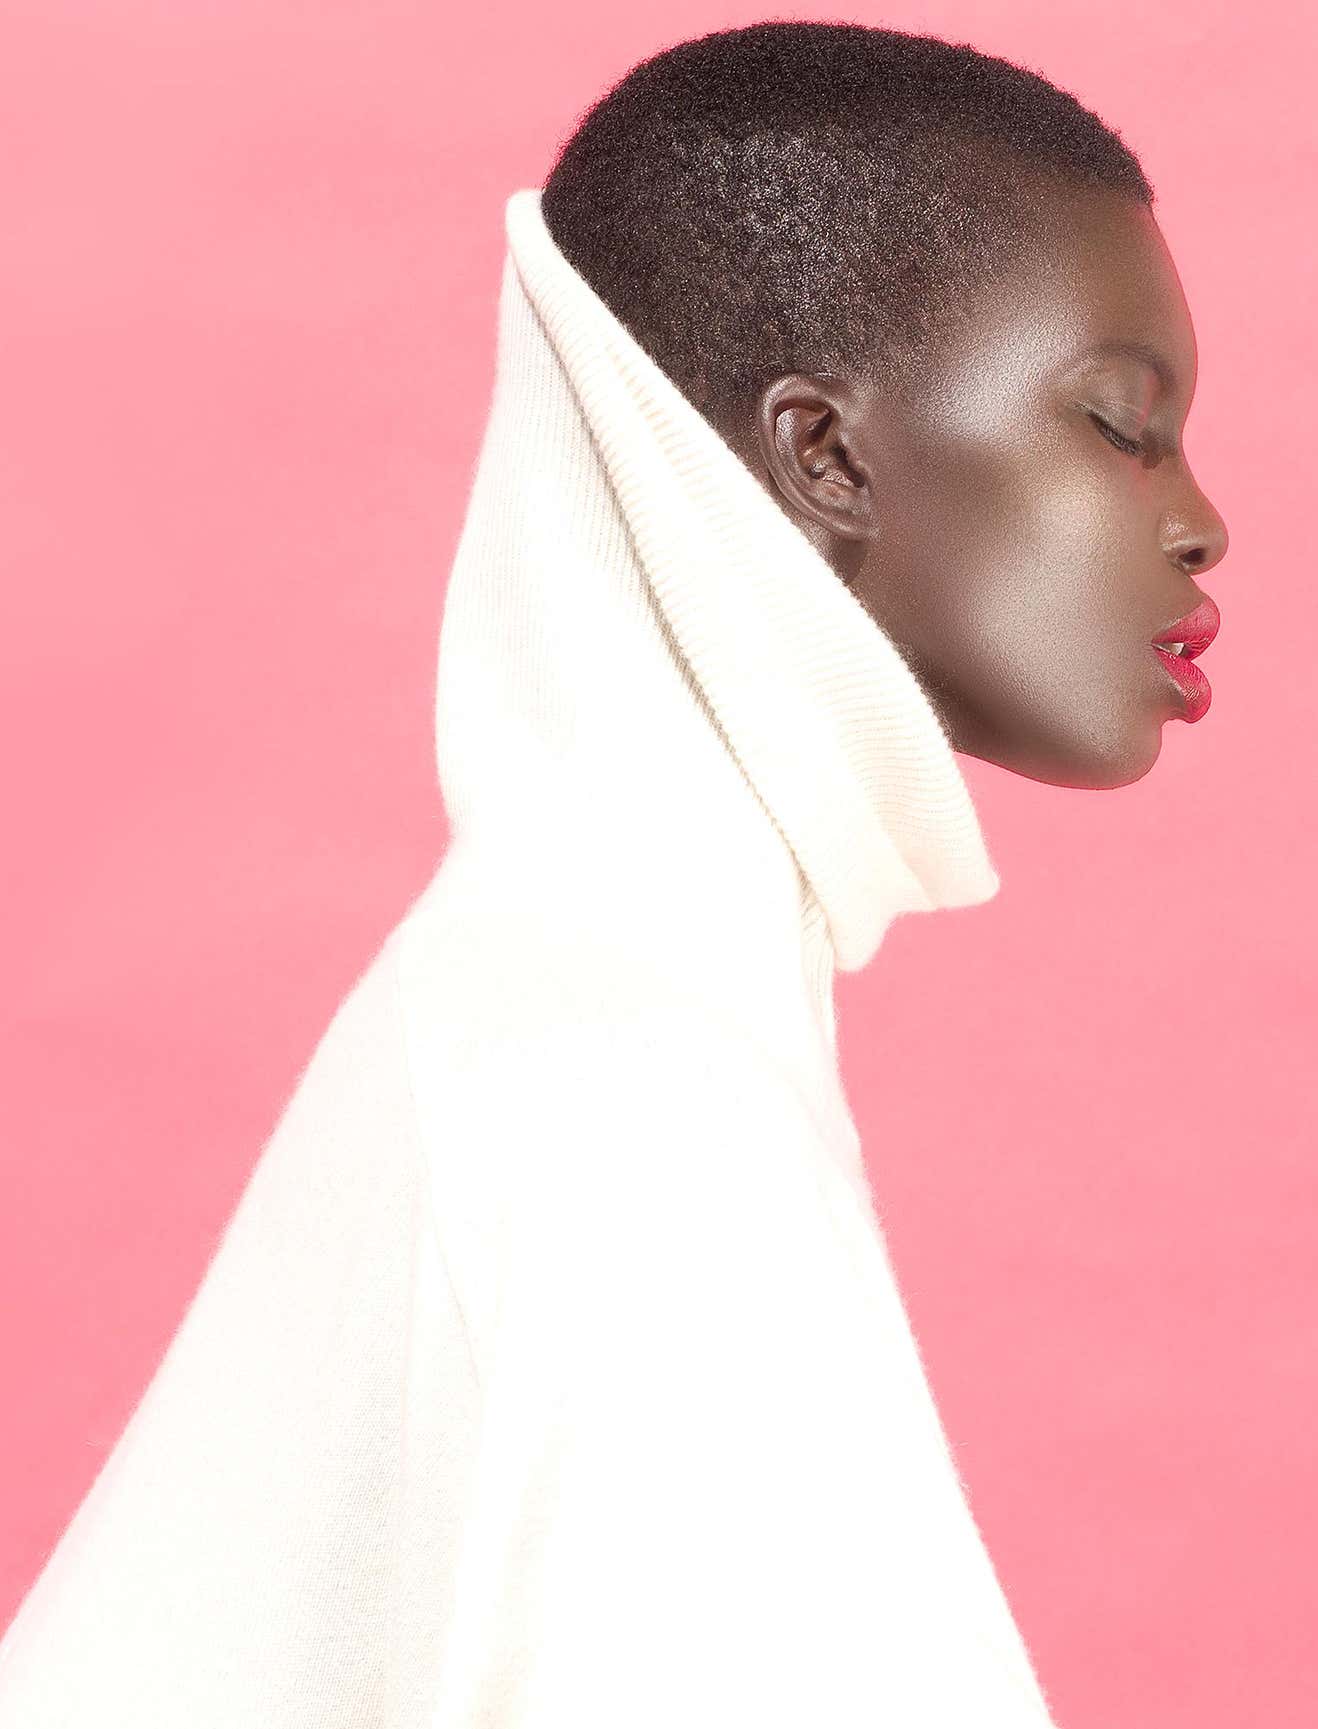 Ashock by Sylvie Blum, sideprofile of a black model in a white turtleneck and red lip with pink background